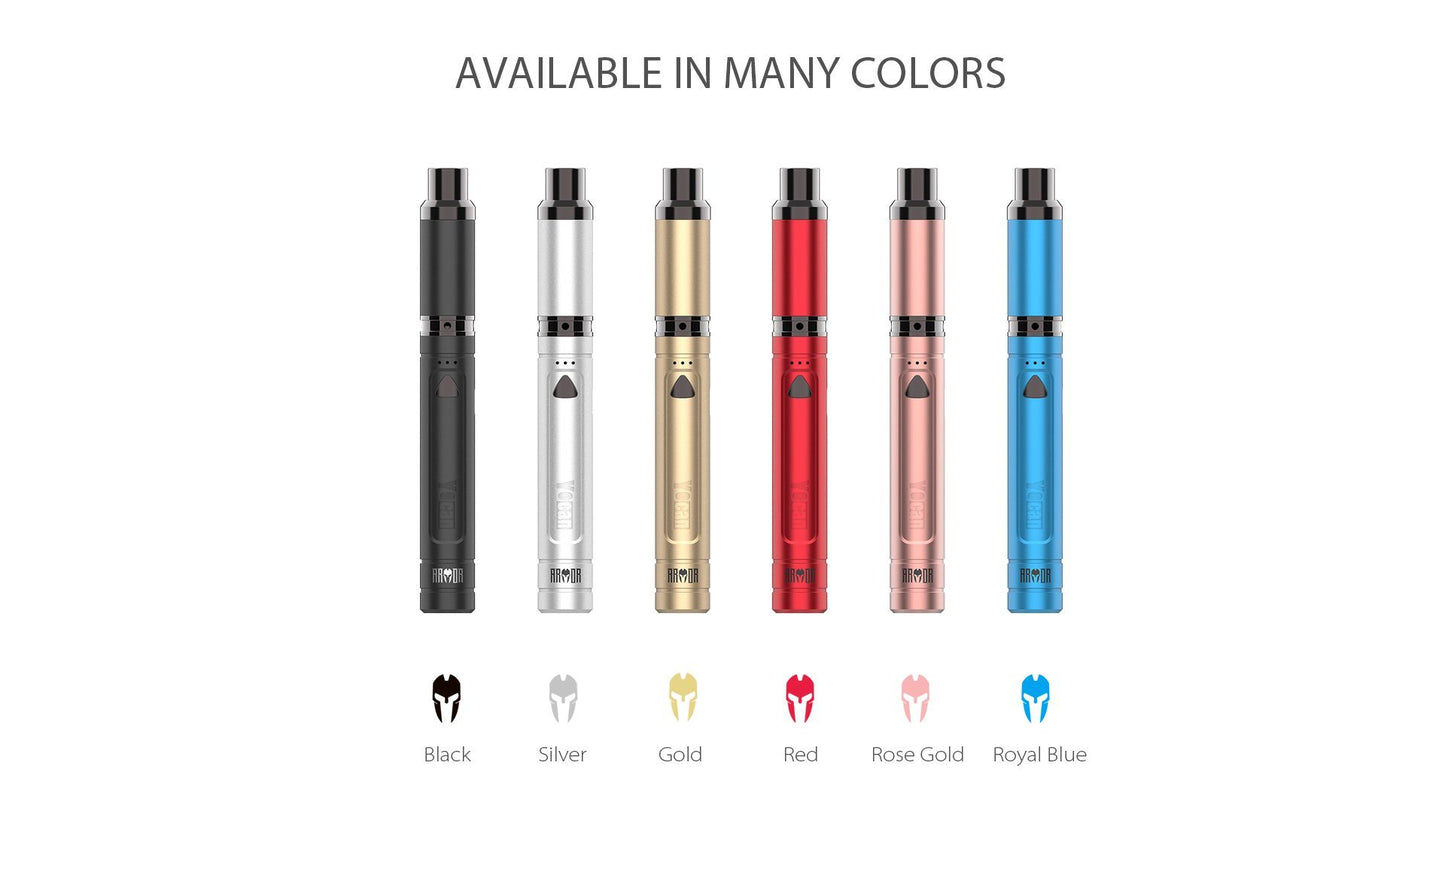 Yocan Armor Vaporizer - Concentrate Flower Power Packages 